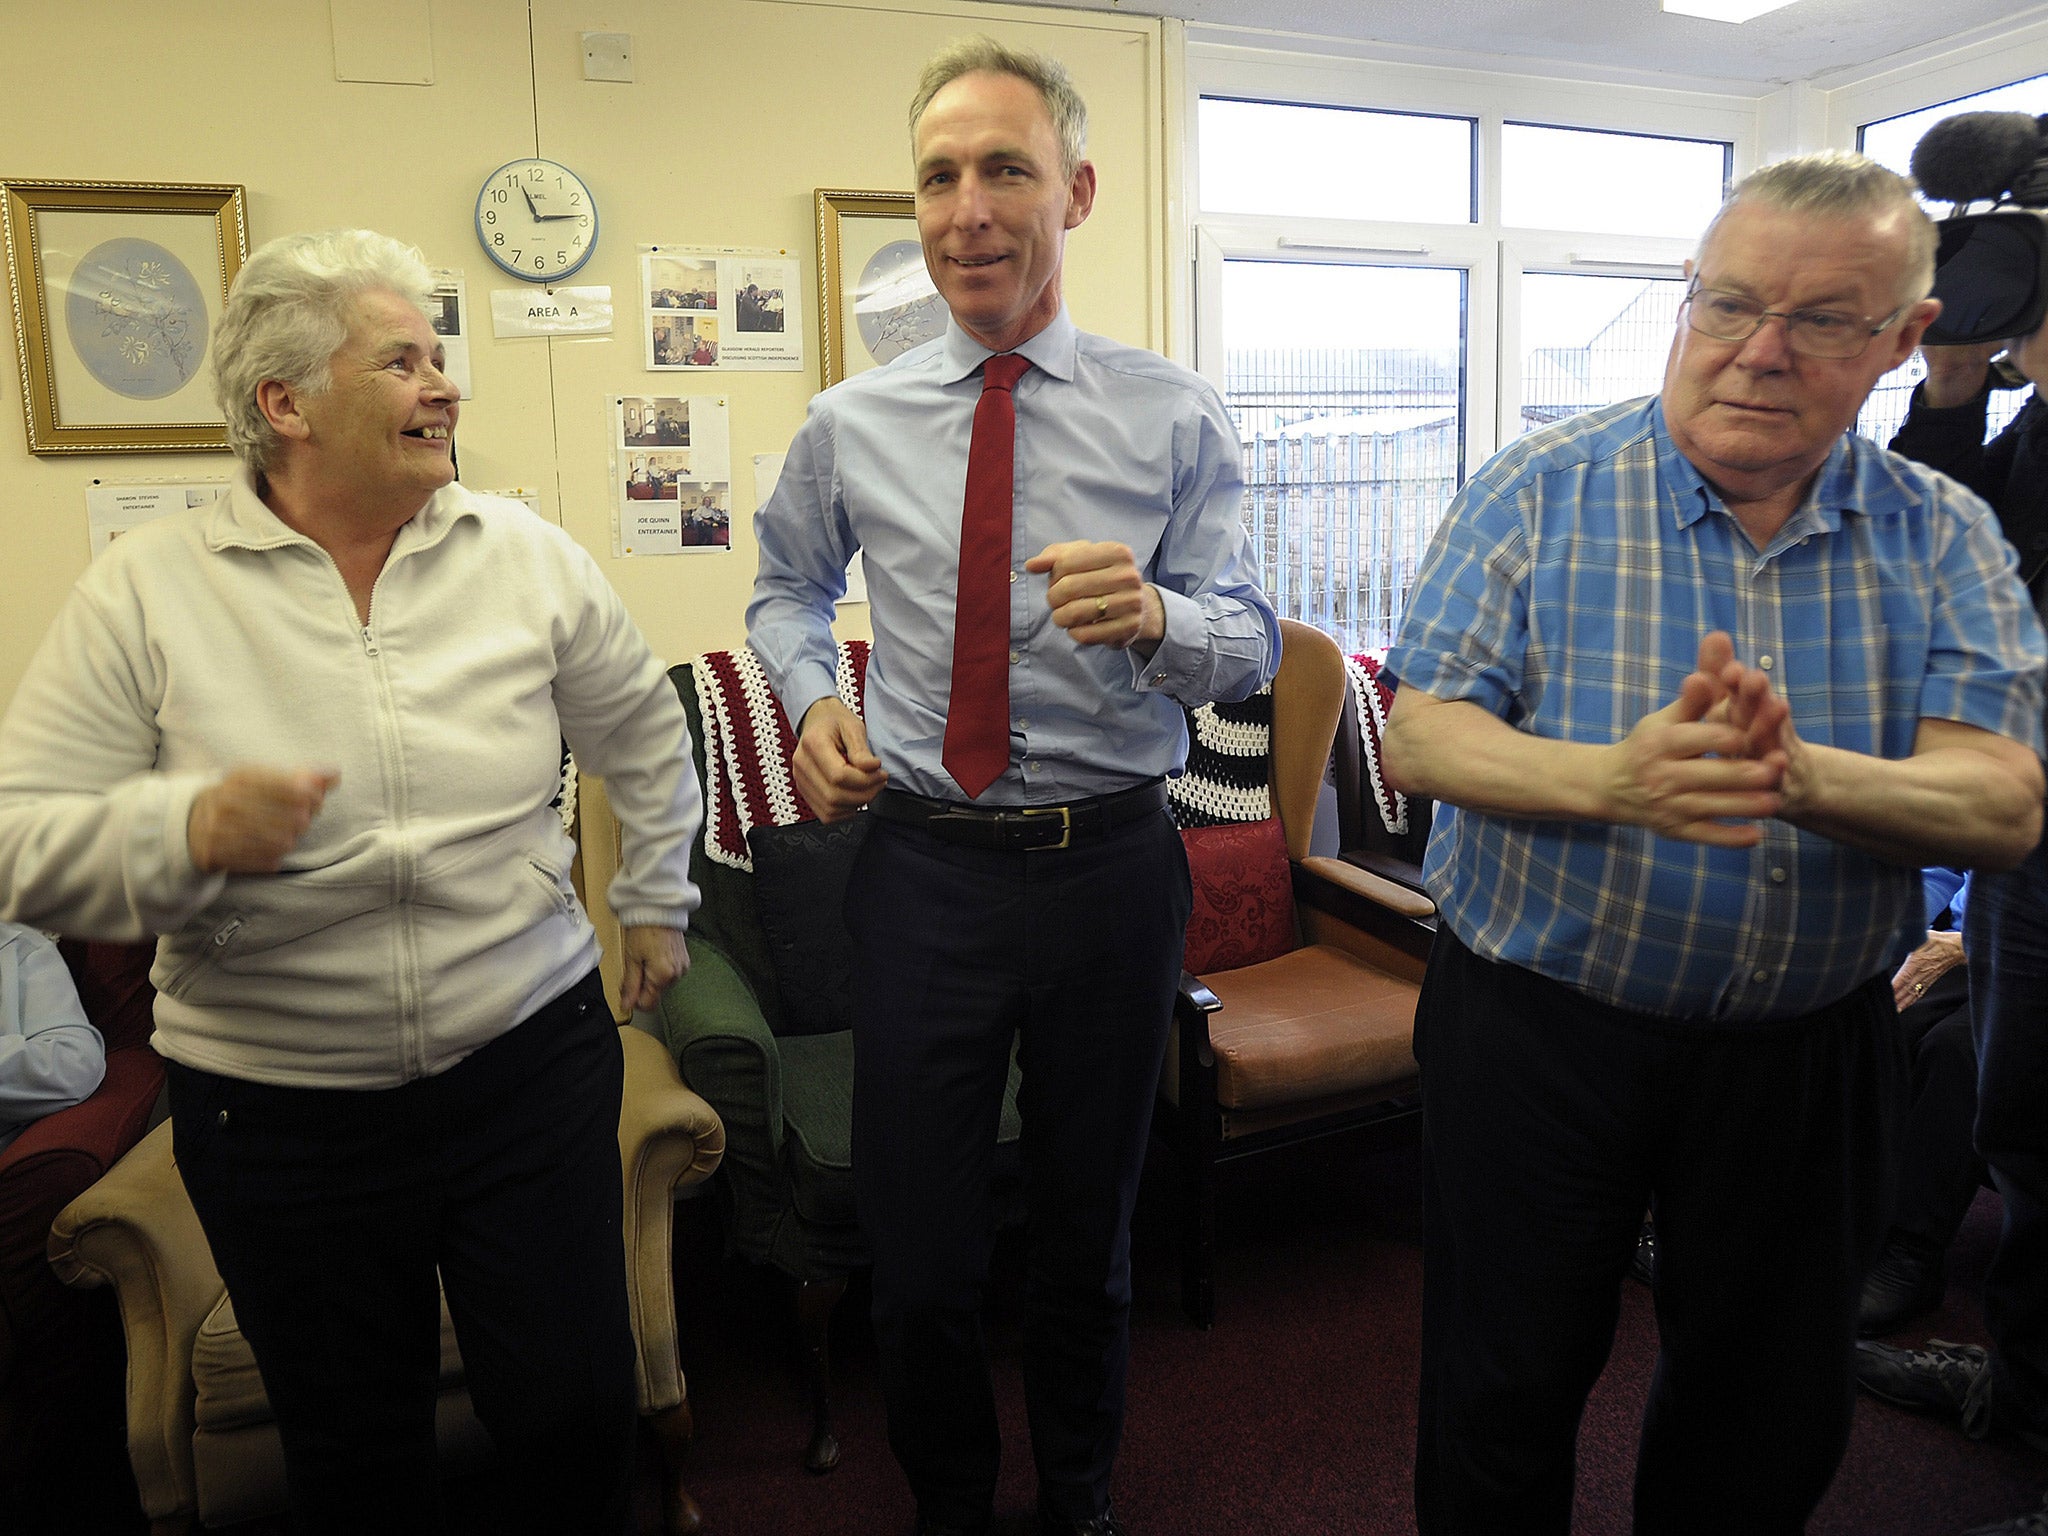 Former Scottish Labour leader Jim Murphy was unable to woo enough voters - young and old - in Scotland (Getty)